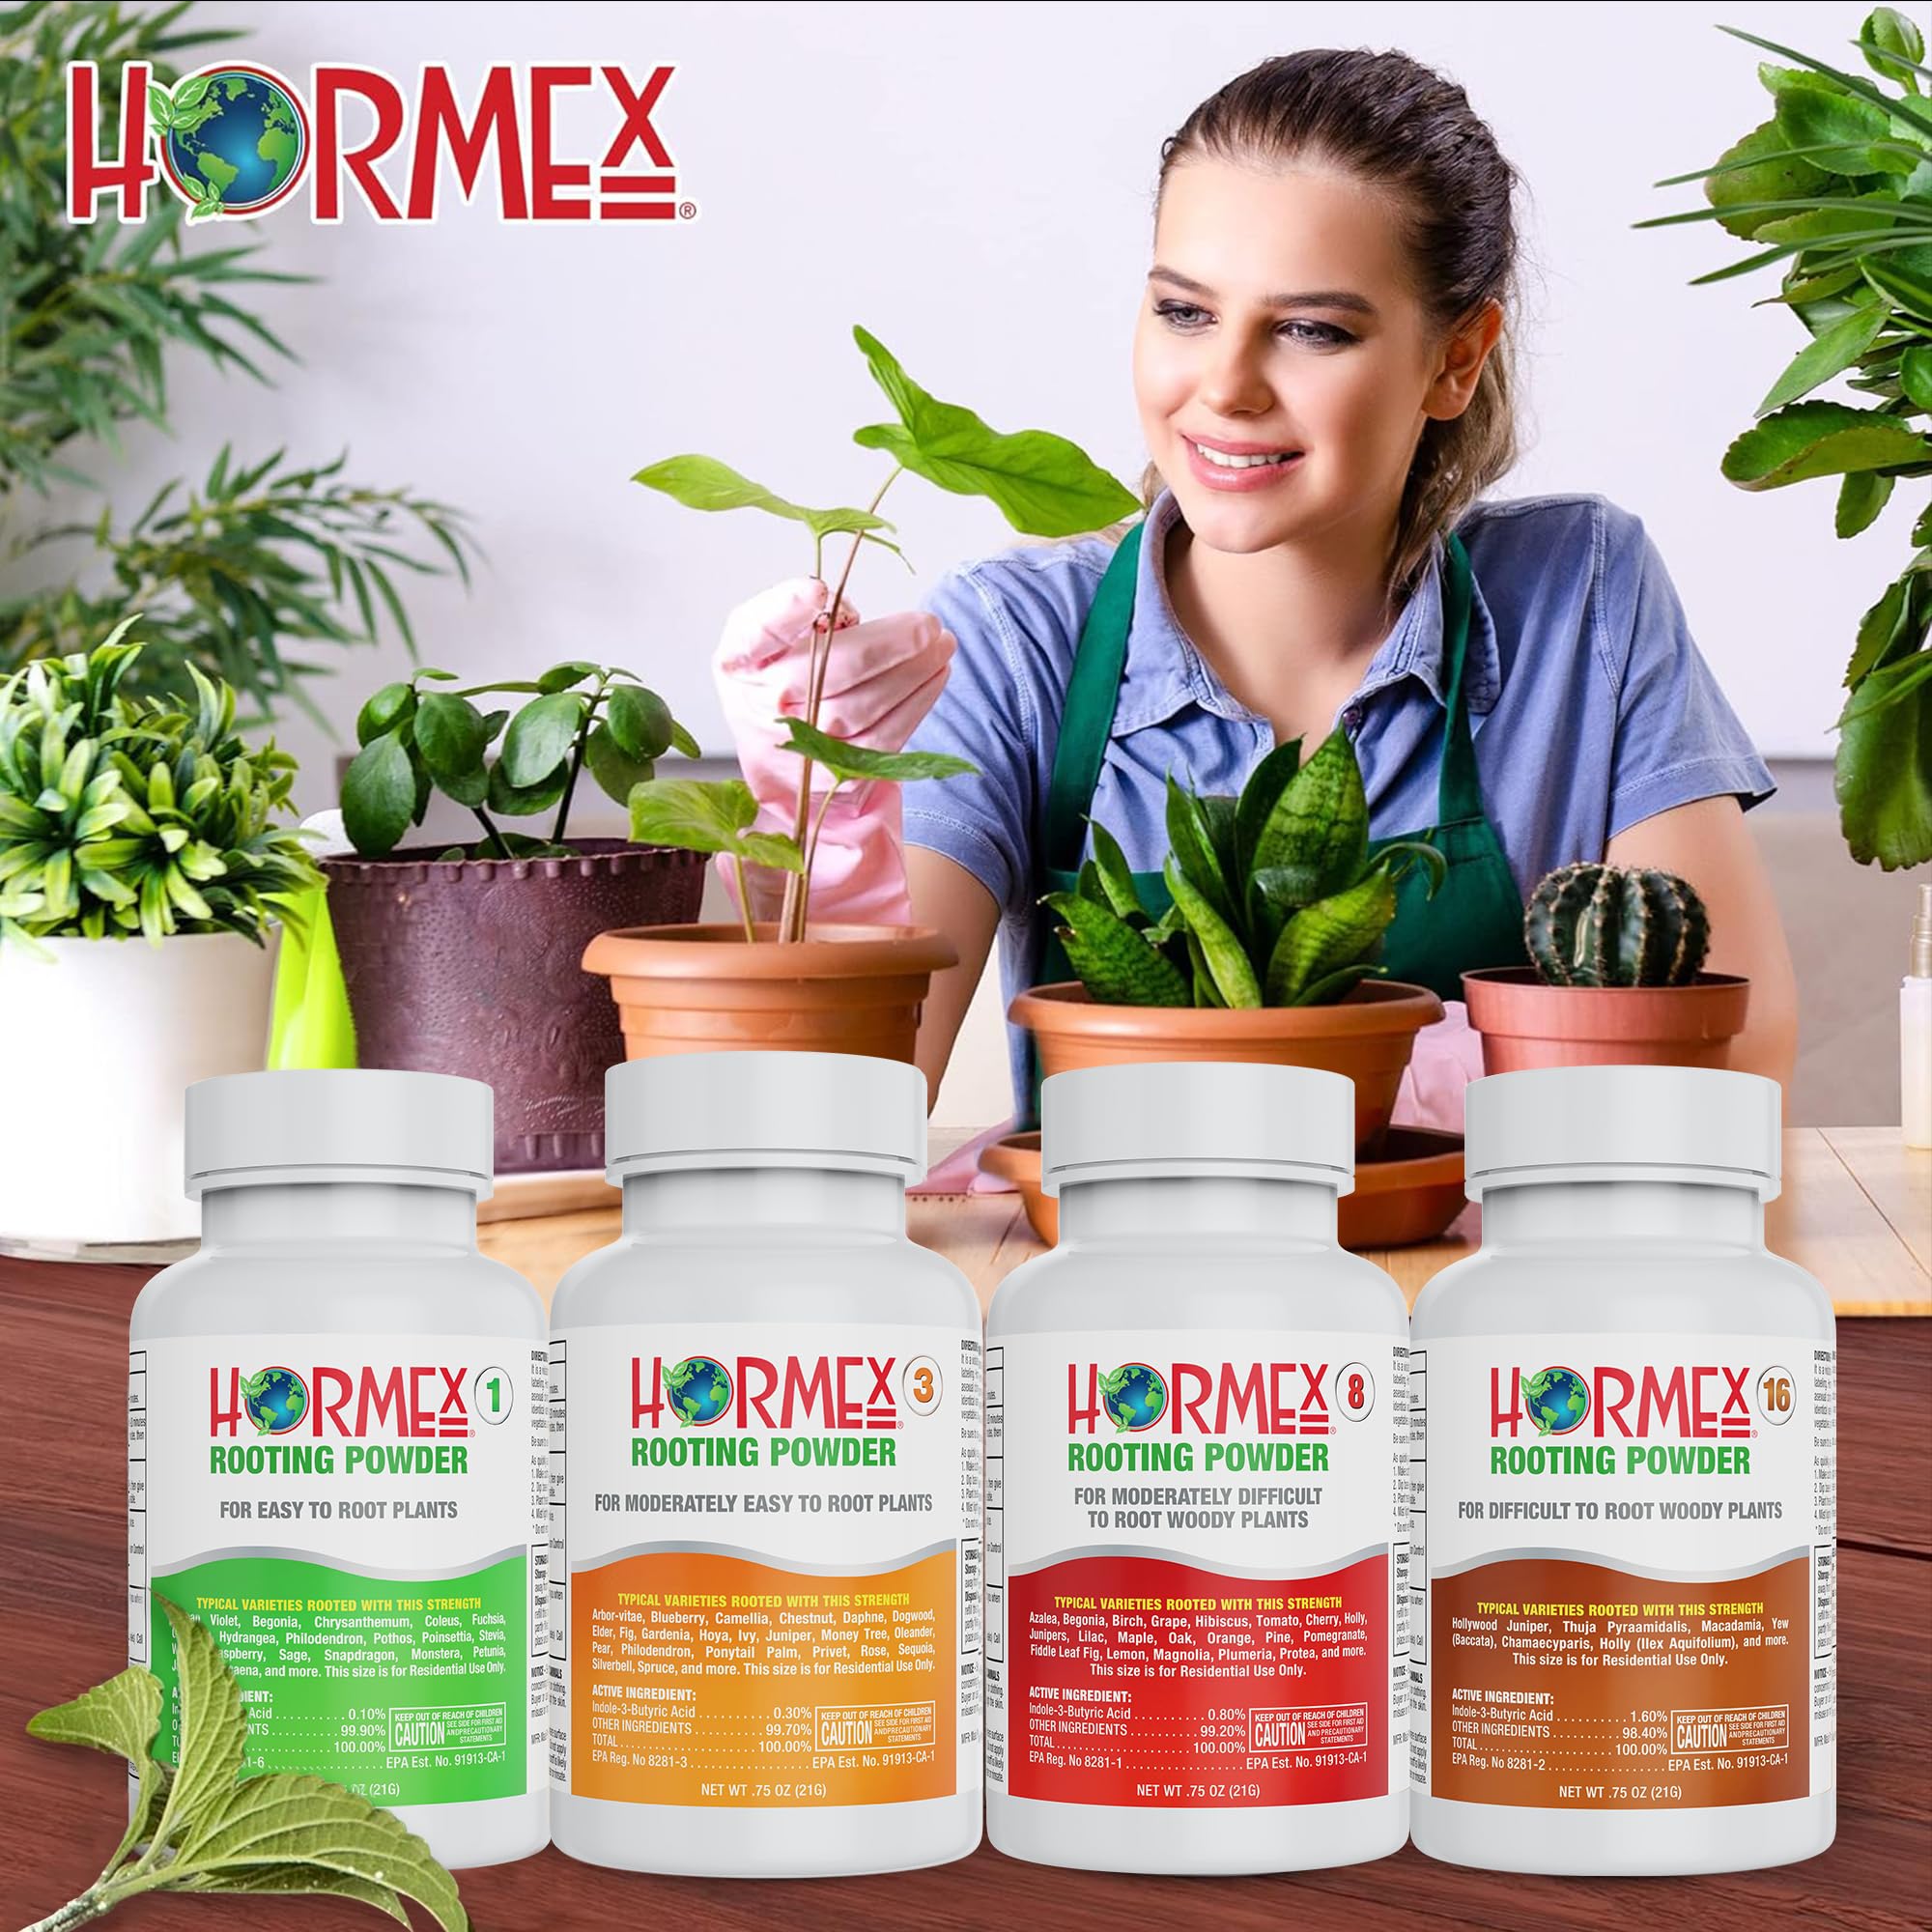 Hormex Rooting Powder #1 - for Moderately Difficult to Root Plants - 0.1 IBA Rooting Hormone for Plant Cuttings - Fast & Effective - Free of Alcohol, Dye, Gel & Preservatives for Healthier Roots, 21g